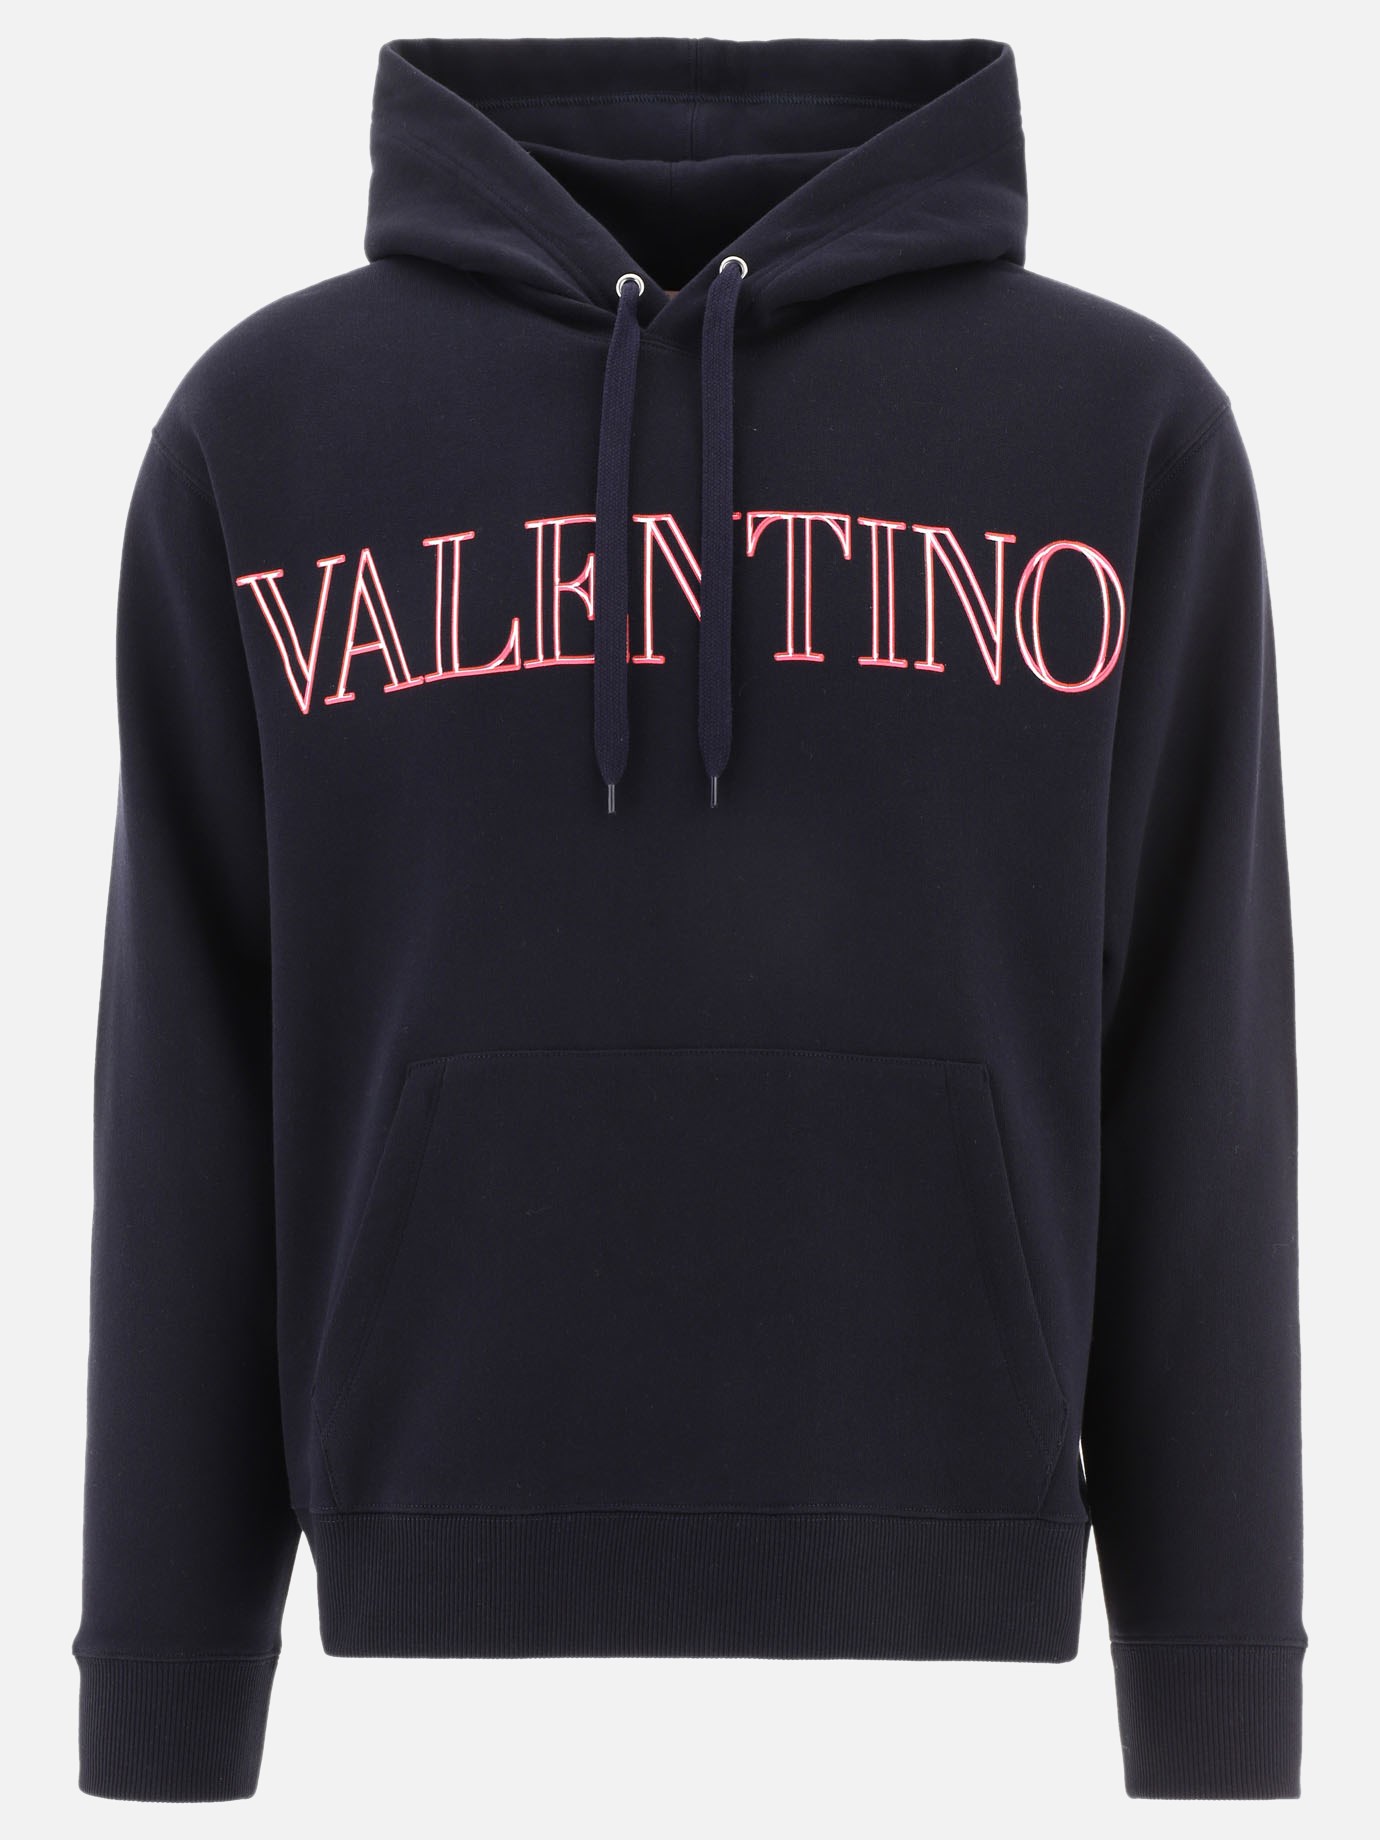  Neon Universe  hoodie by Valentino